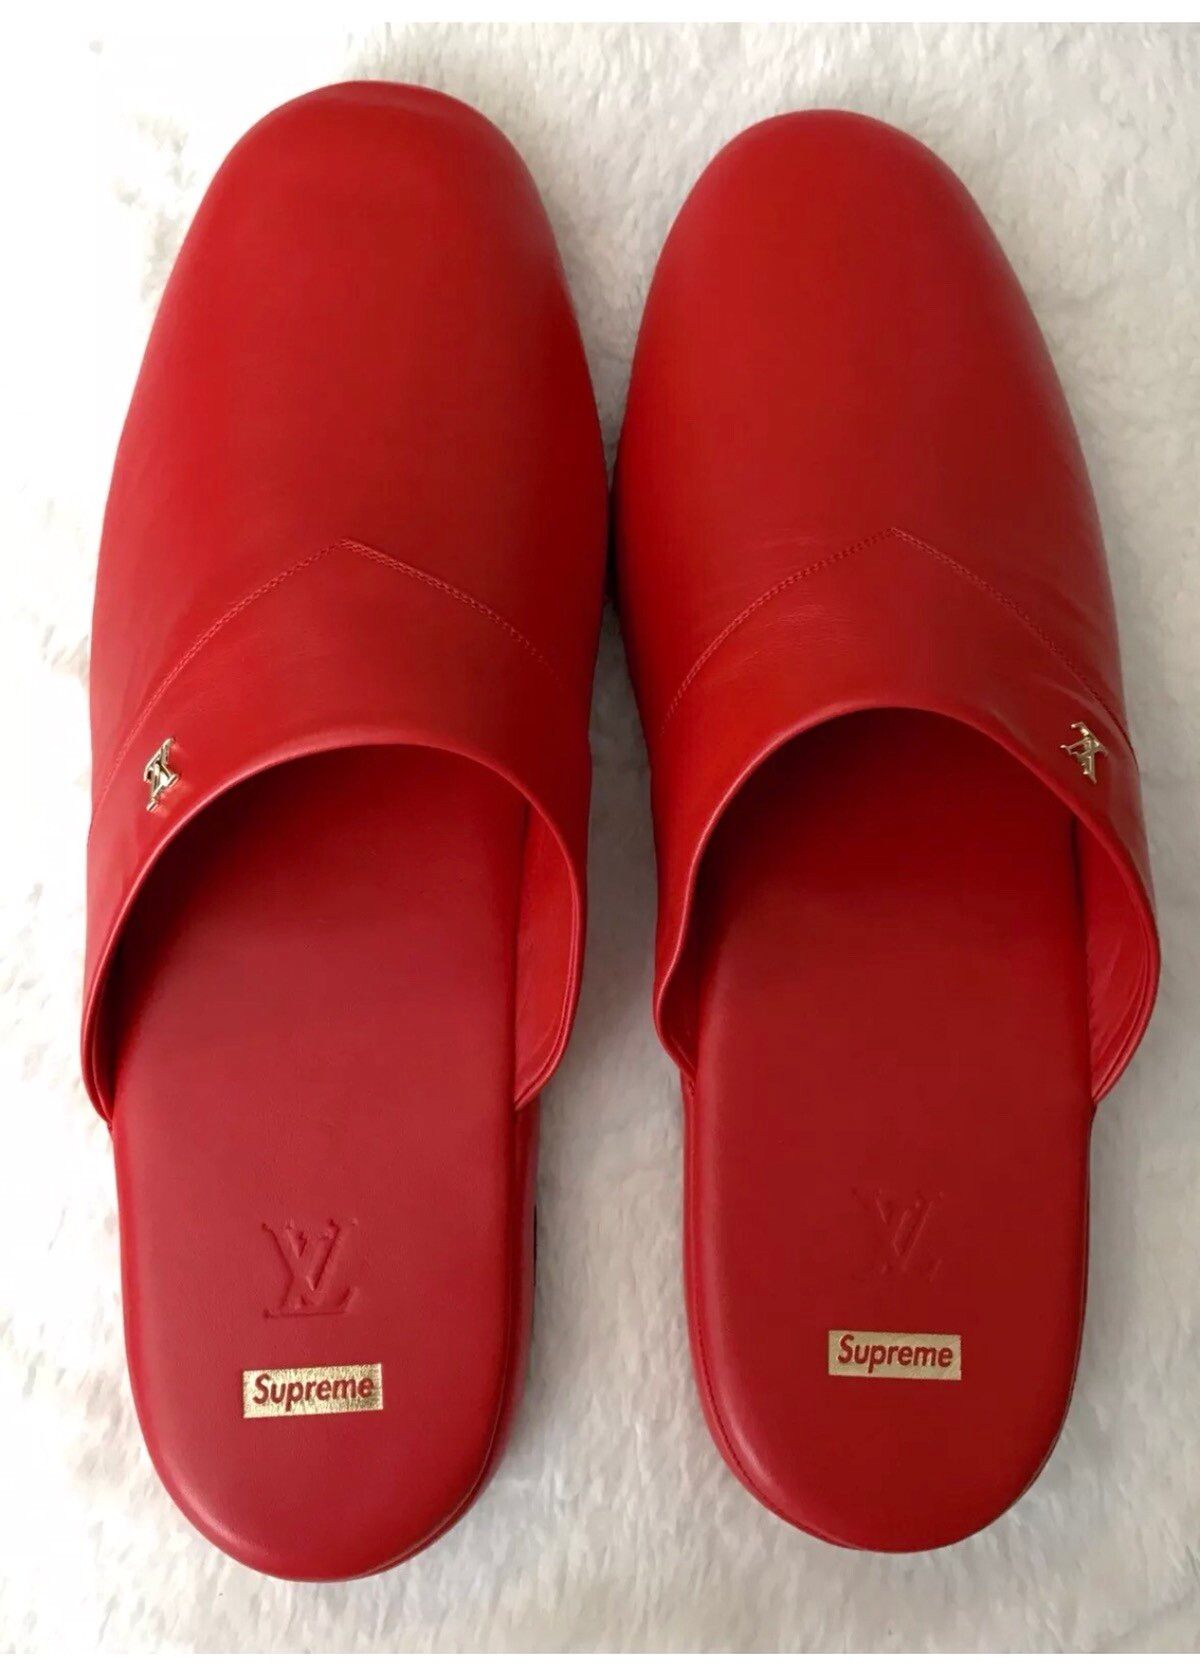 LOUIS VUITTON × Supreme Hugh Slippers Slip On Shoes Red Size 7